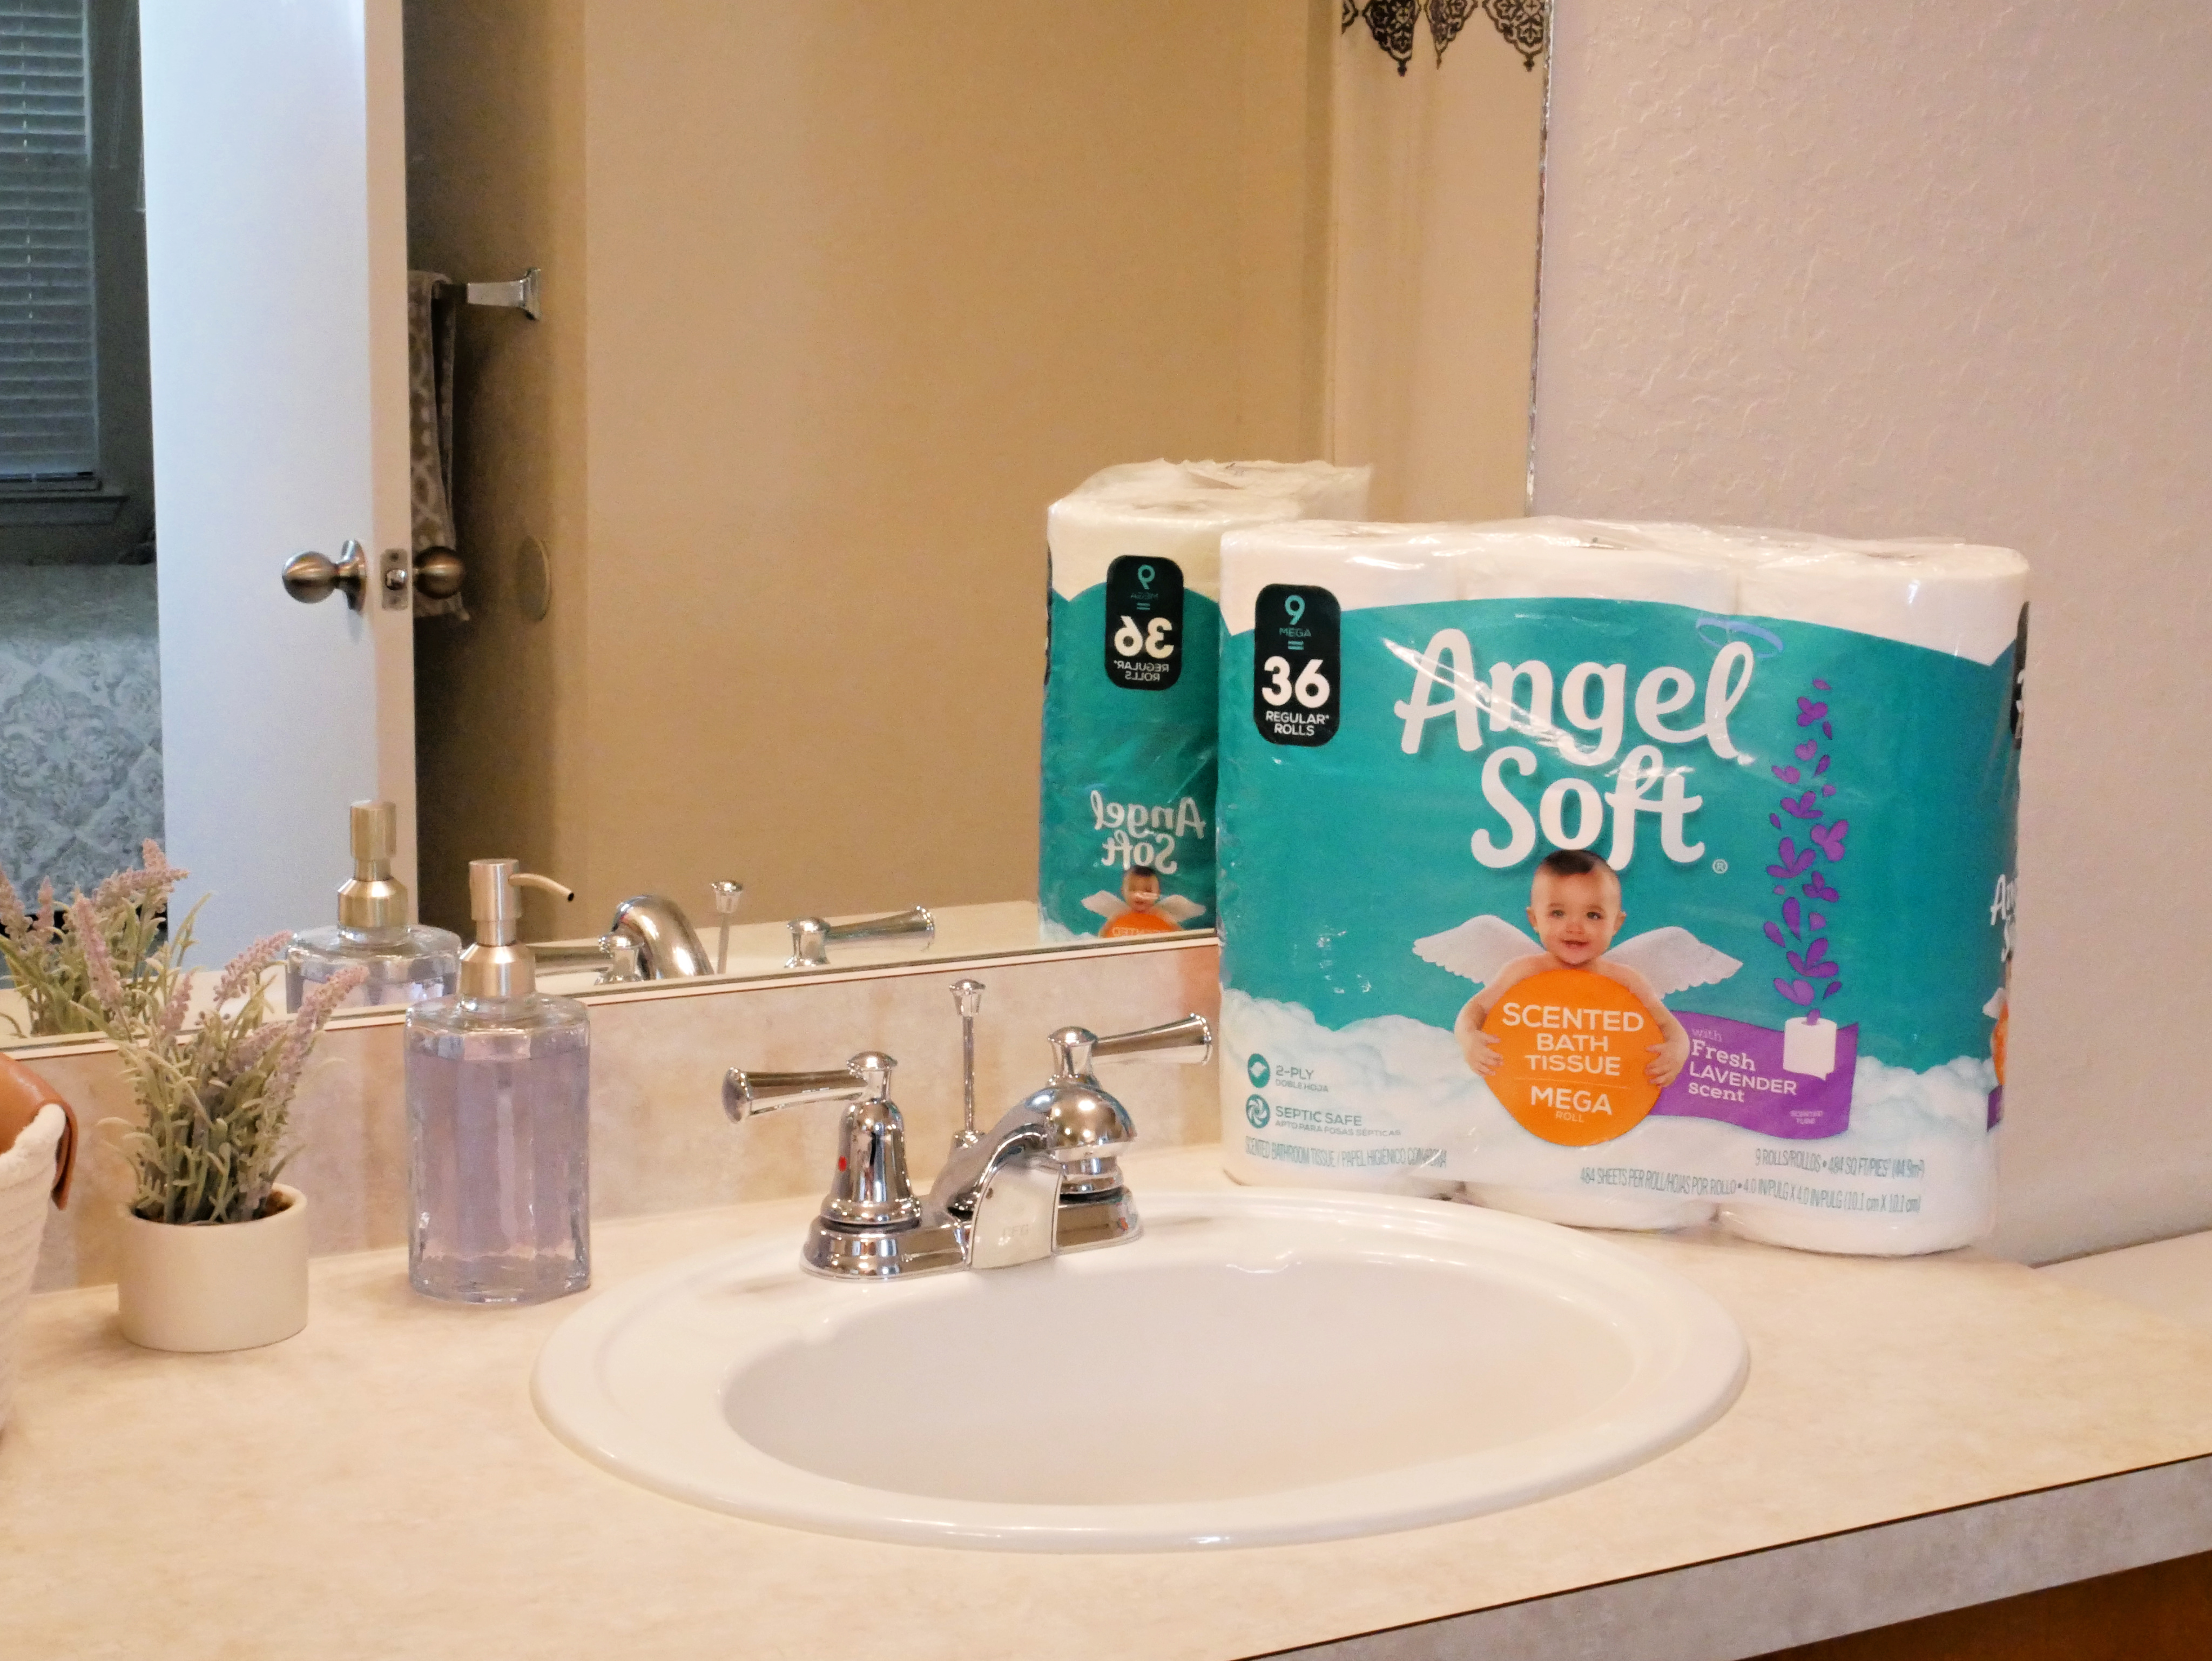 I am all about saving money however I can. Today, I have a new bathroom hack to share with you. And, if you like the scent of lavender as much as me you're going to especially love this money-saving bathroom hack. Ditch the spray and switch to Angel Soft® with Fresh Lavender Scent. The scented tube will leave your bathroom smelling great.